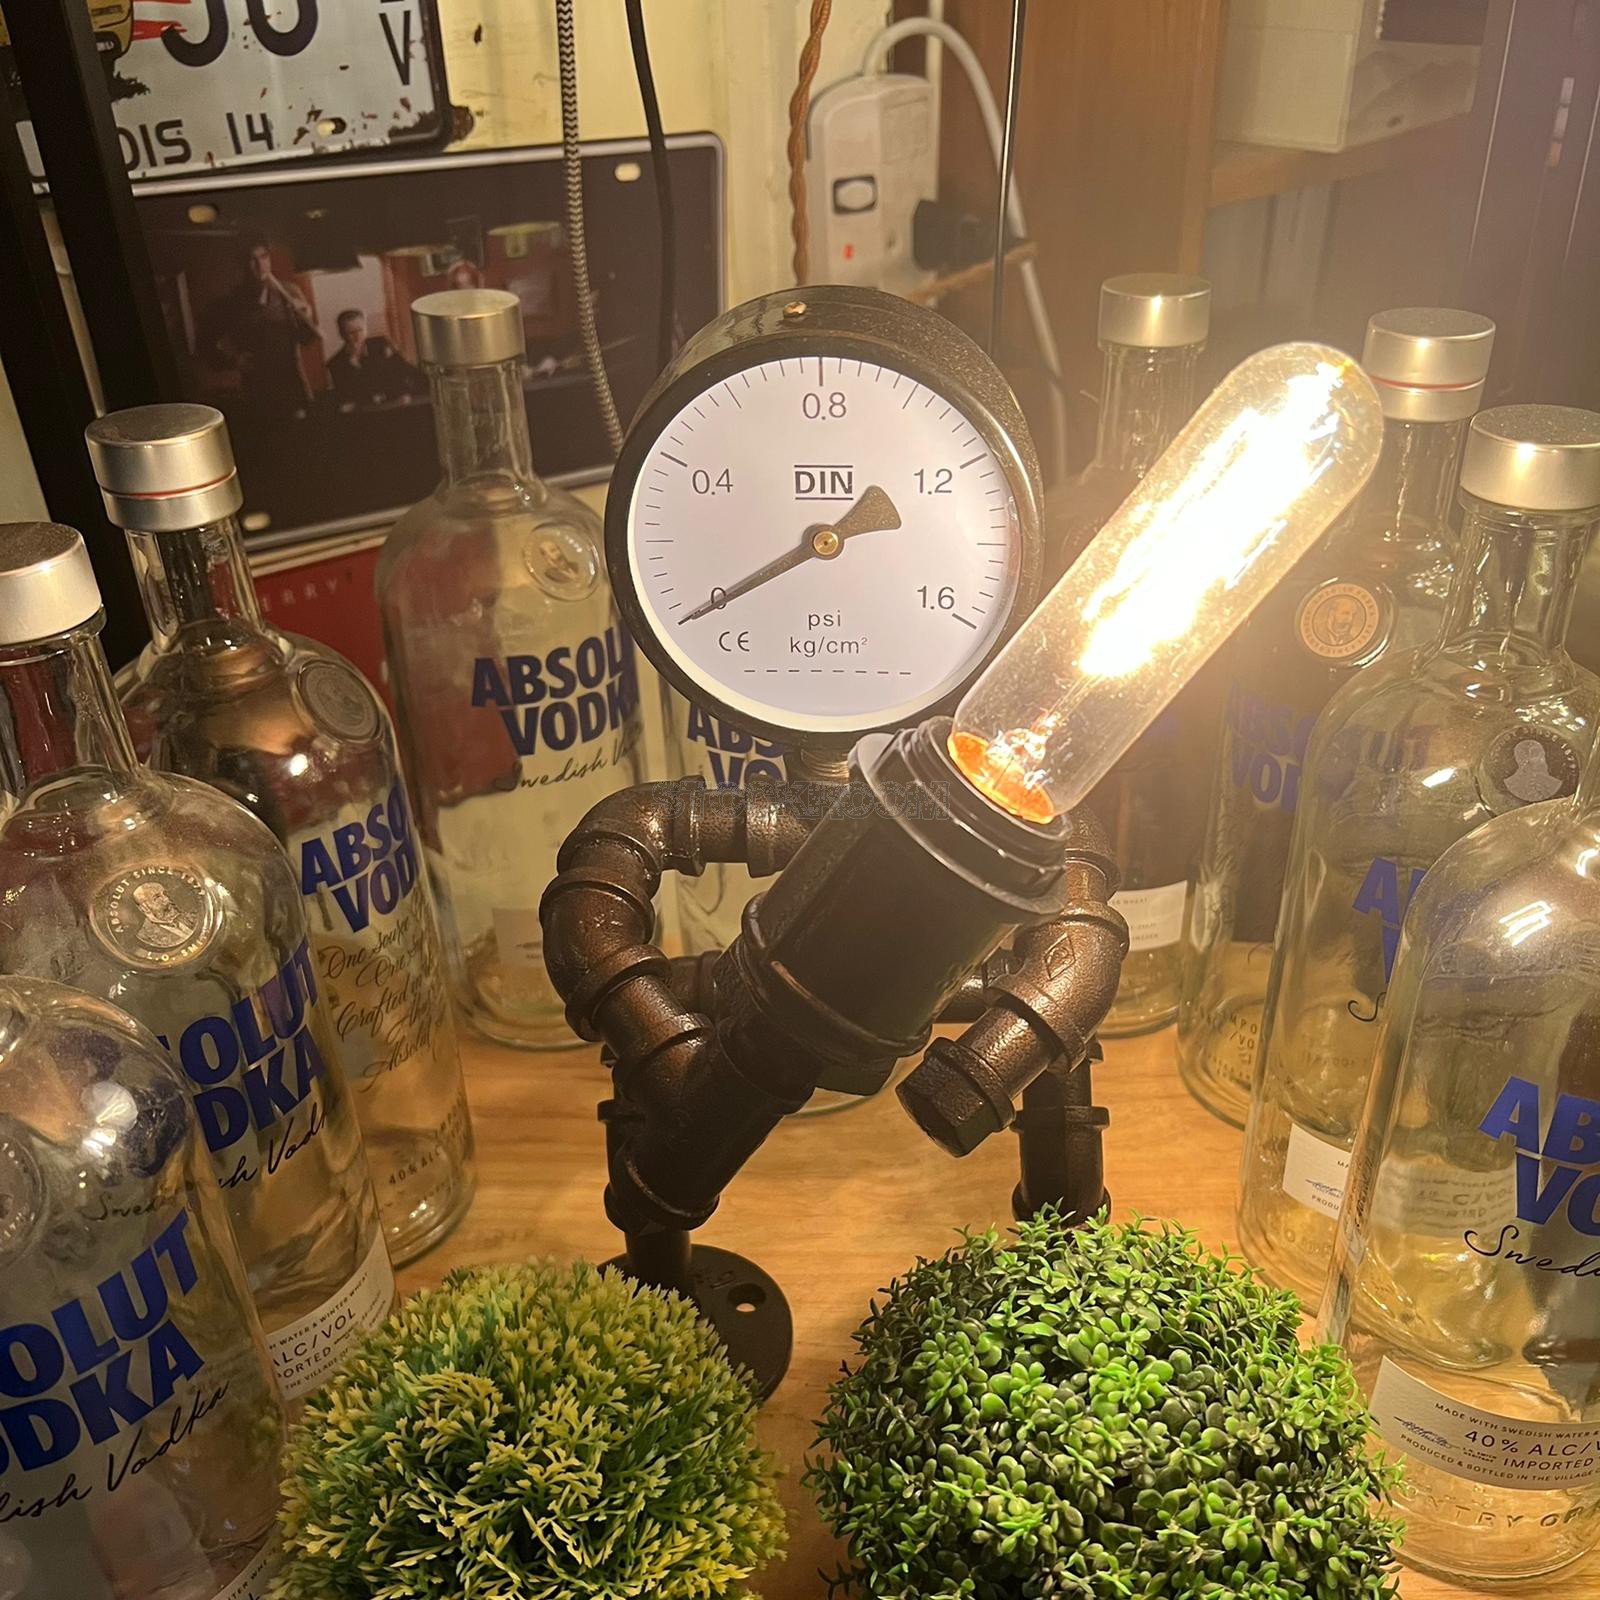 Retro Steam Punk Robot Lamp with a Water Meter